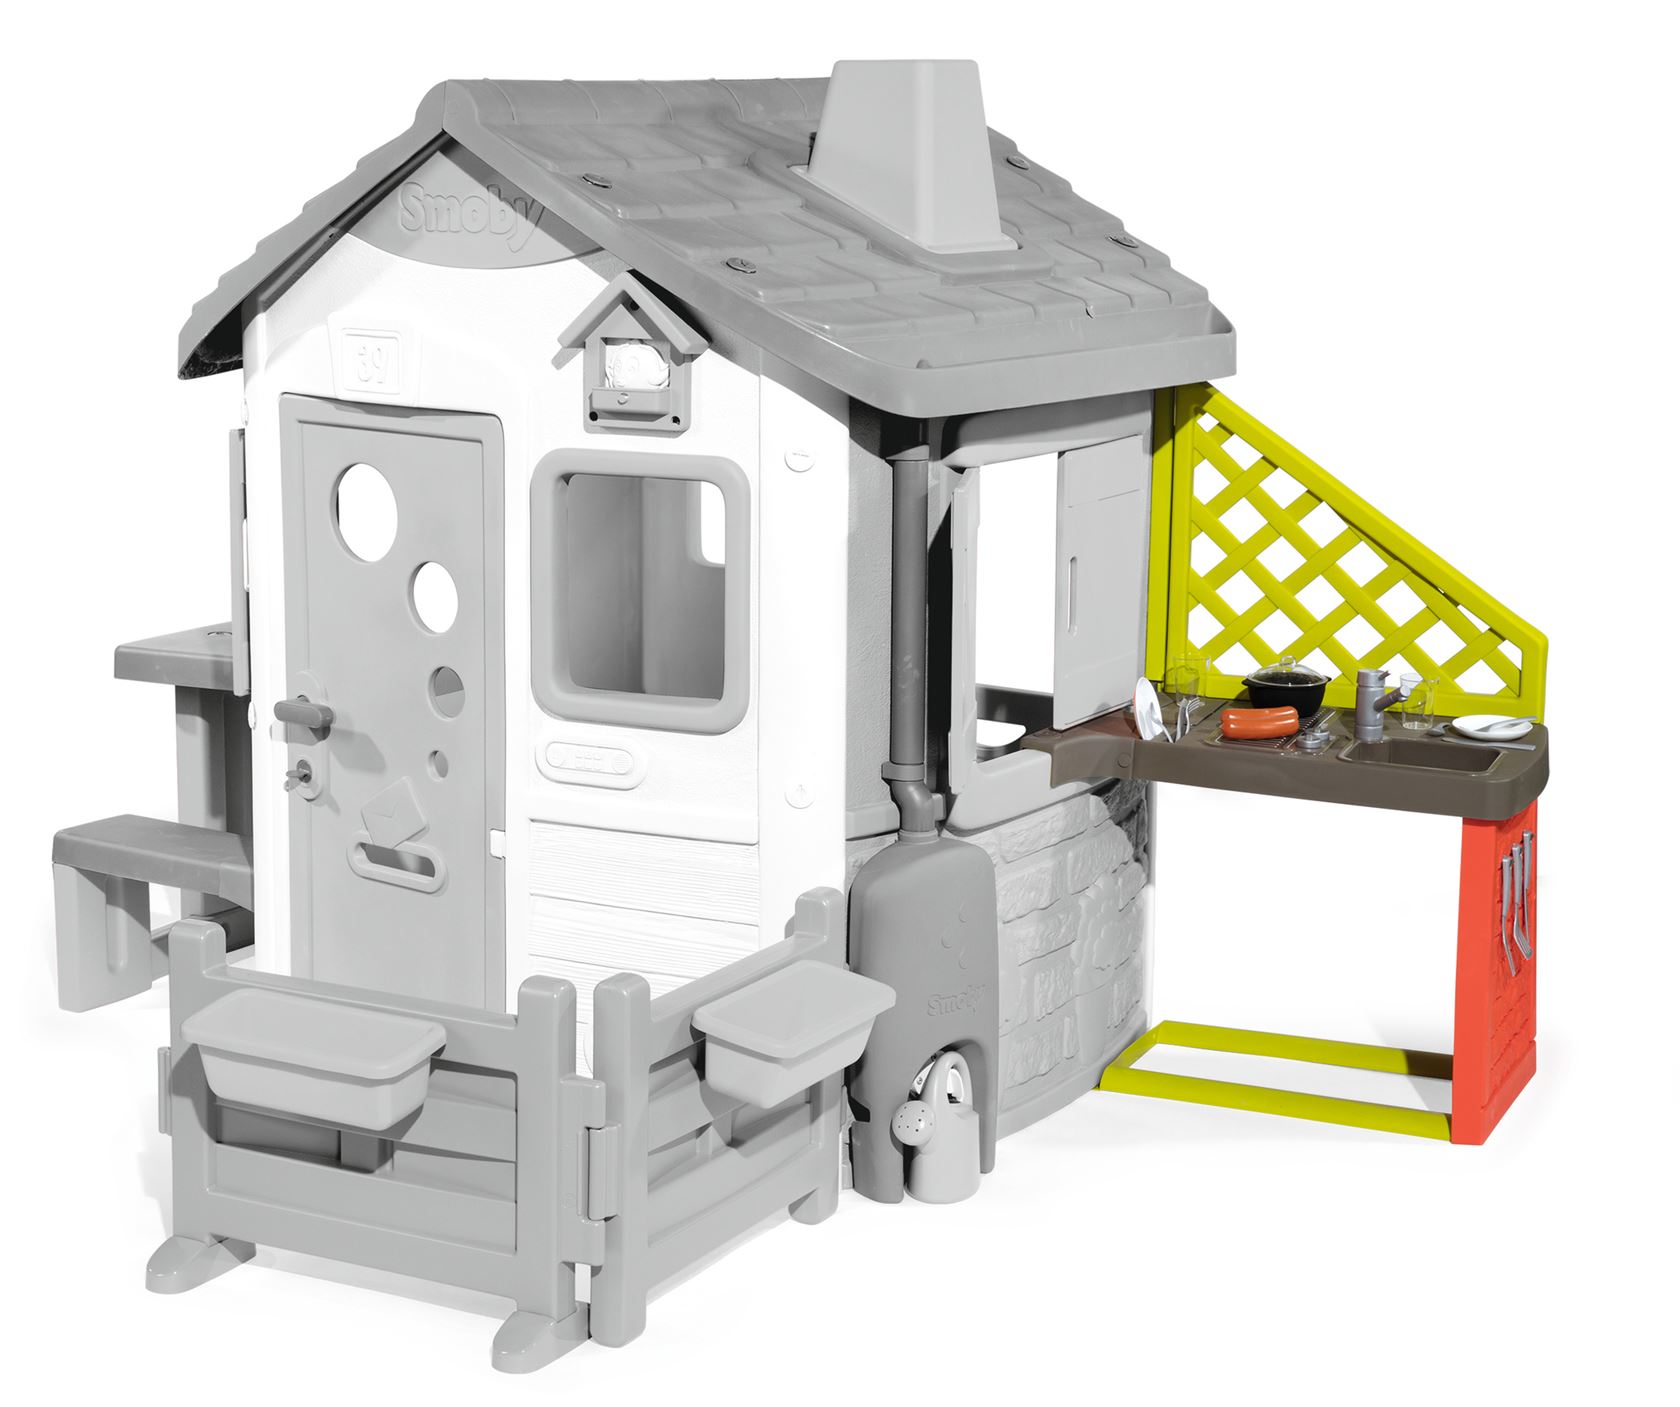 Smoby accessory - outdoor kitchen with accessories for Smoby playhouses